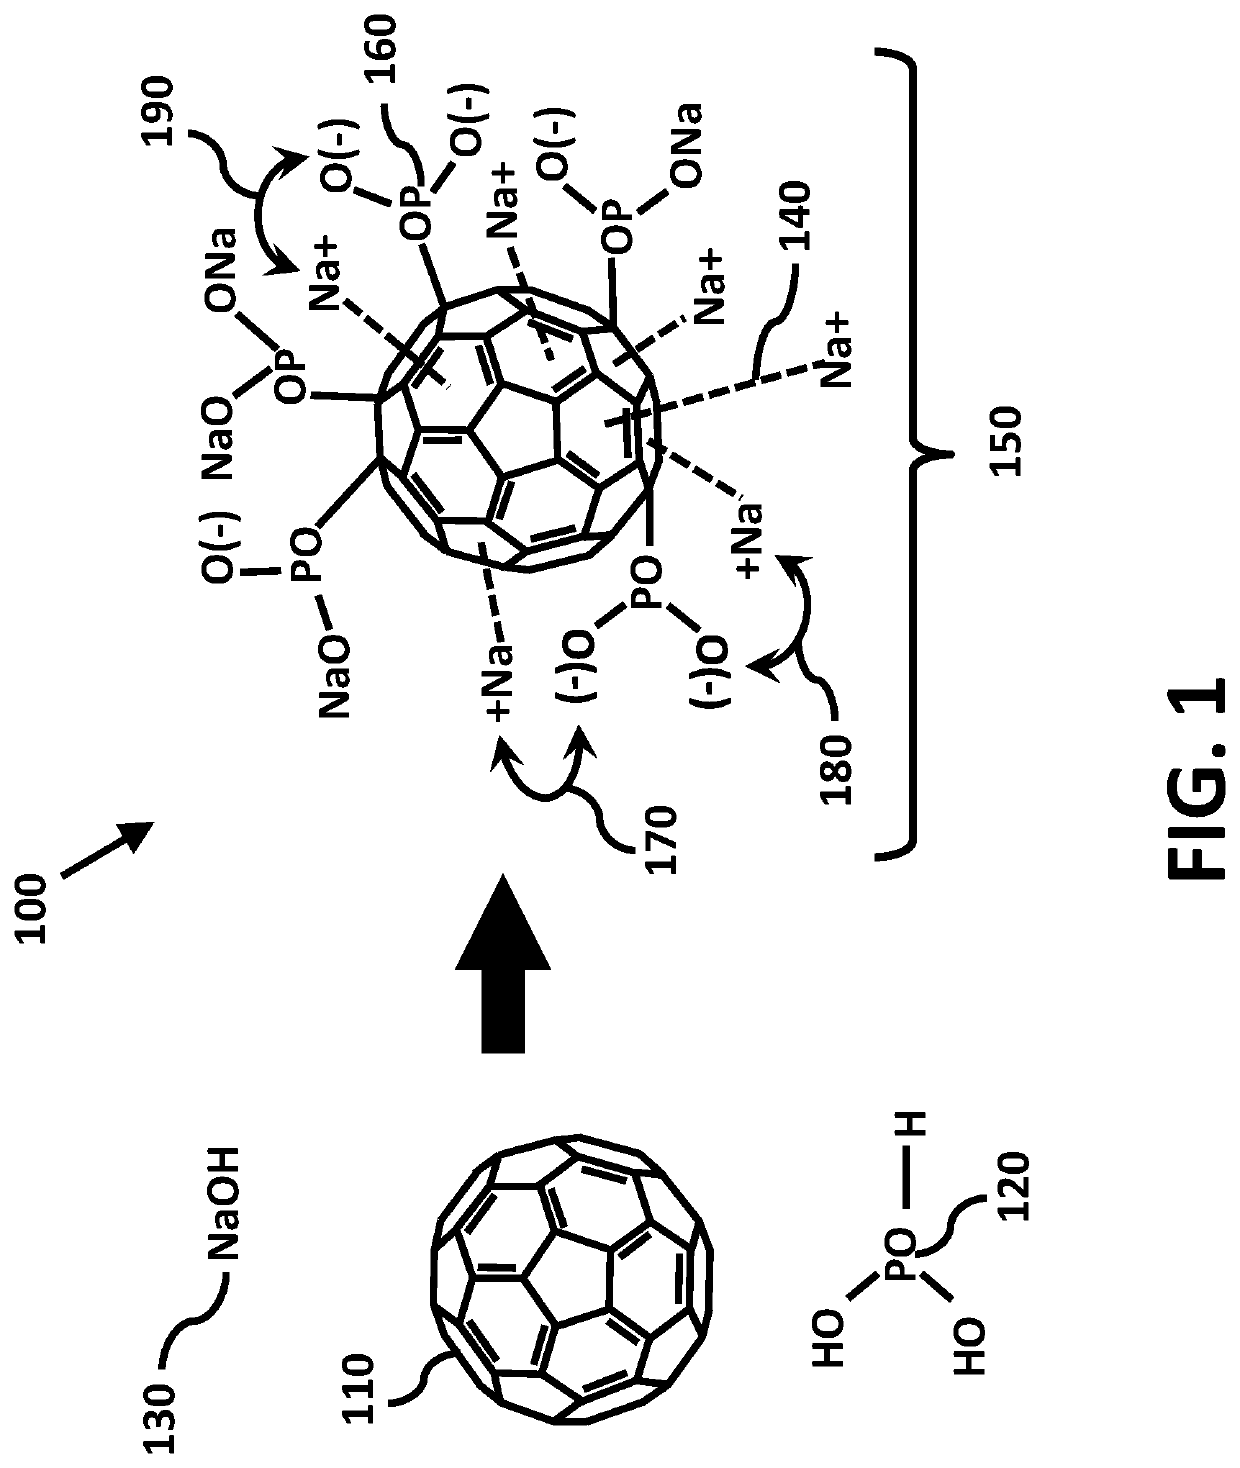 Antimicrobial nano-deliverant and methods